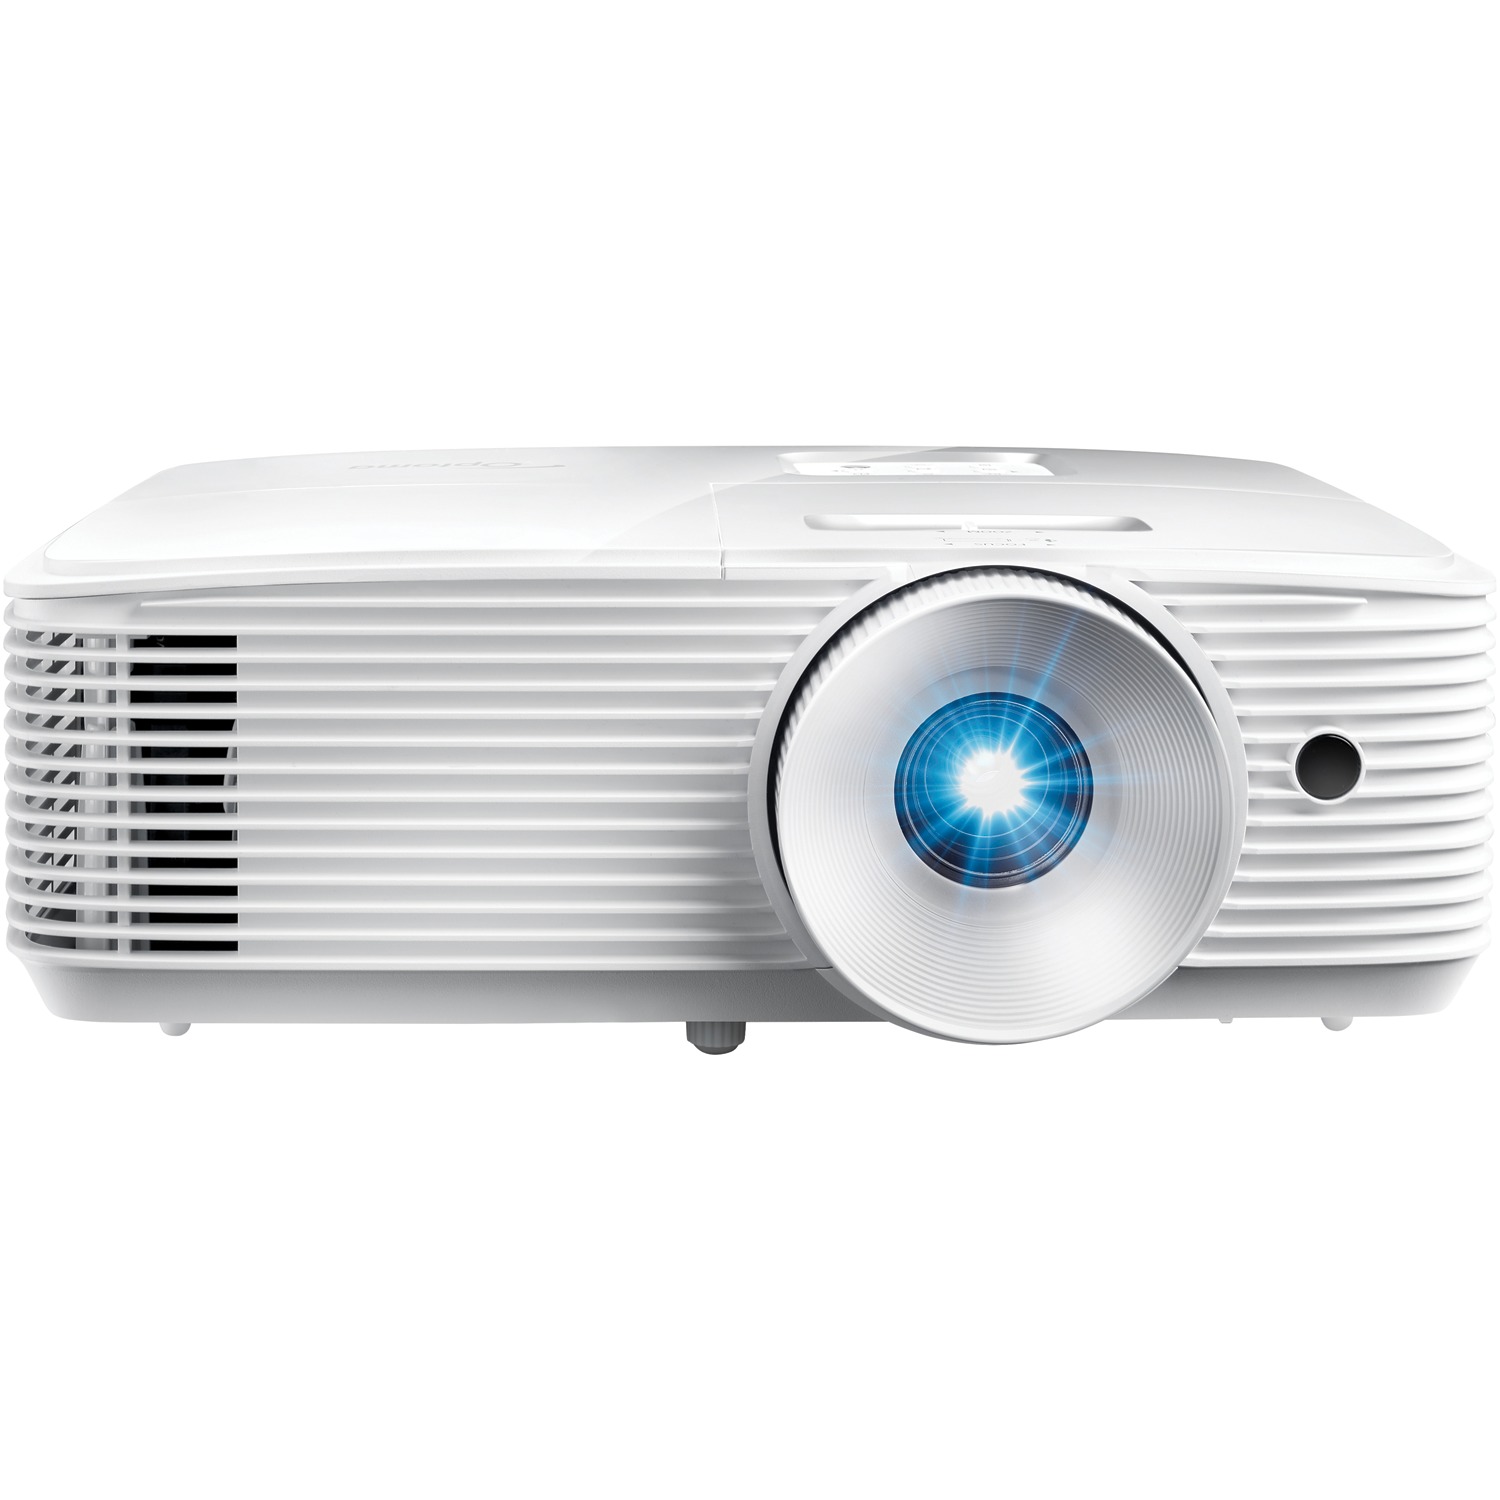 Optoma X343 3600 Lumens XGA DLP Projector with 15,000-hour Lamp Life - image 1 of 5